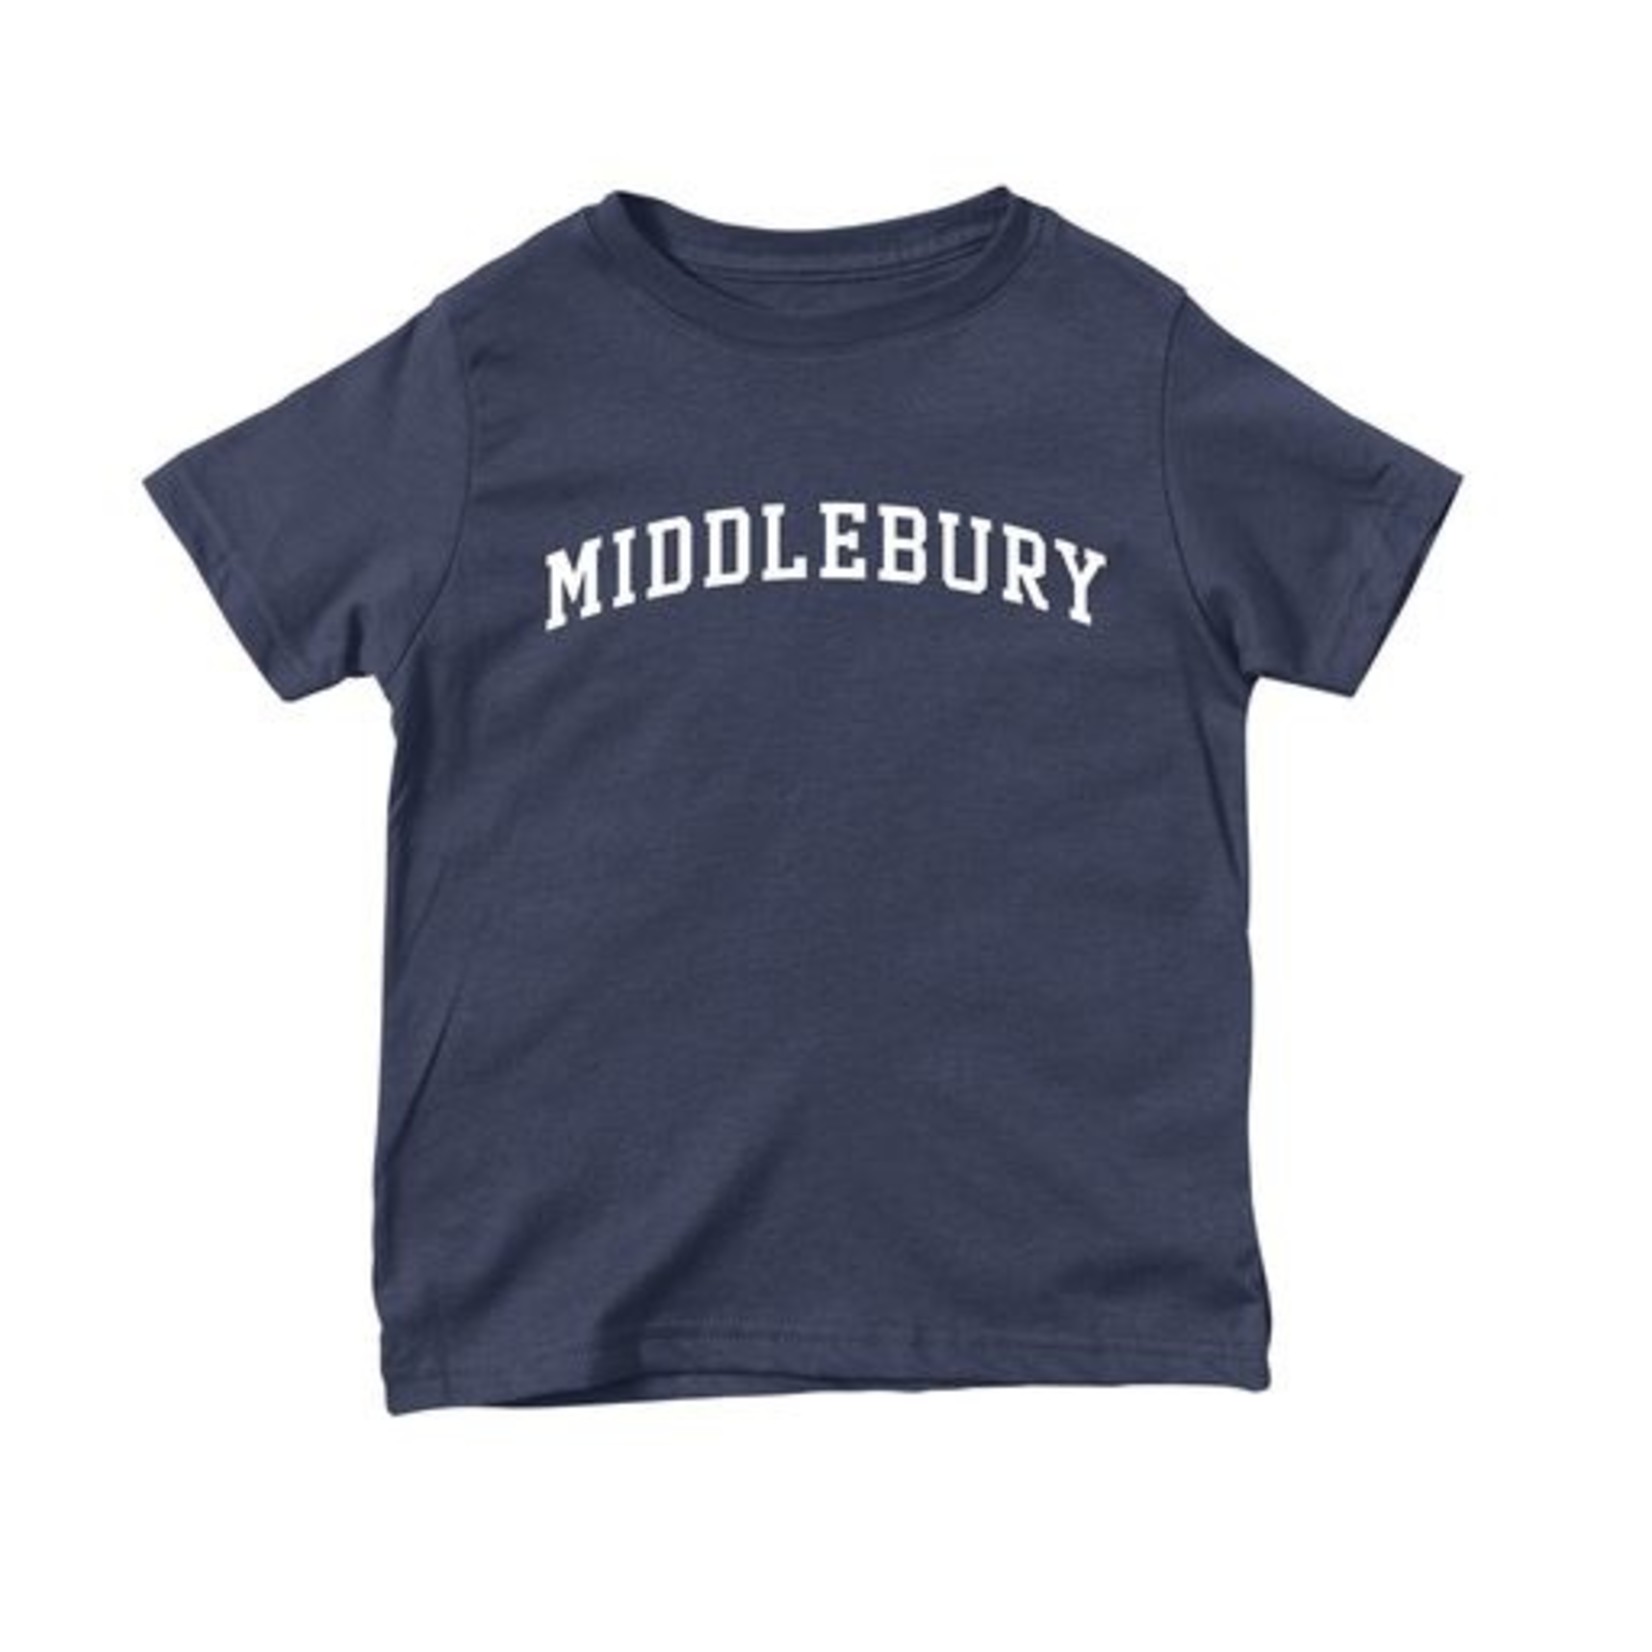 TODDLER CLASSIC TEE